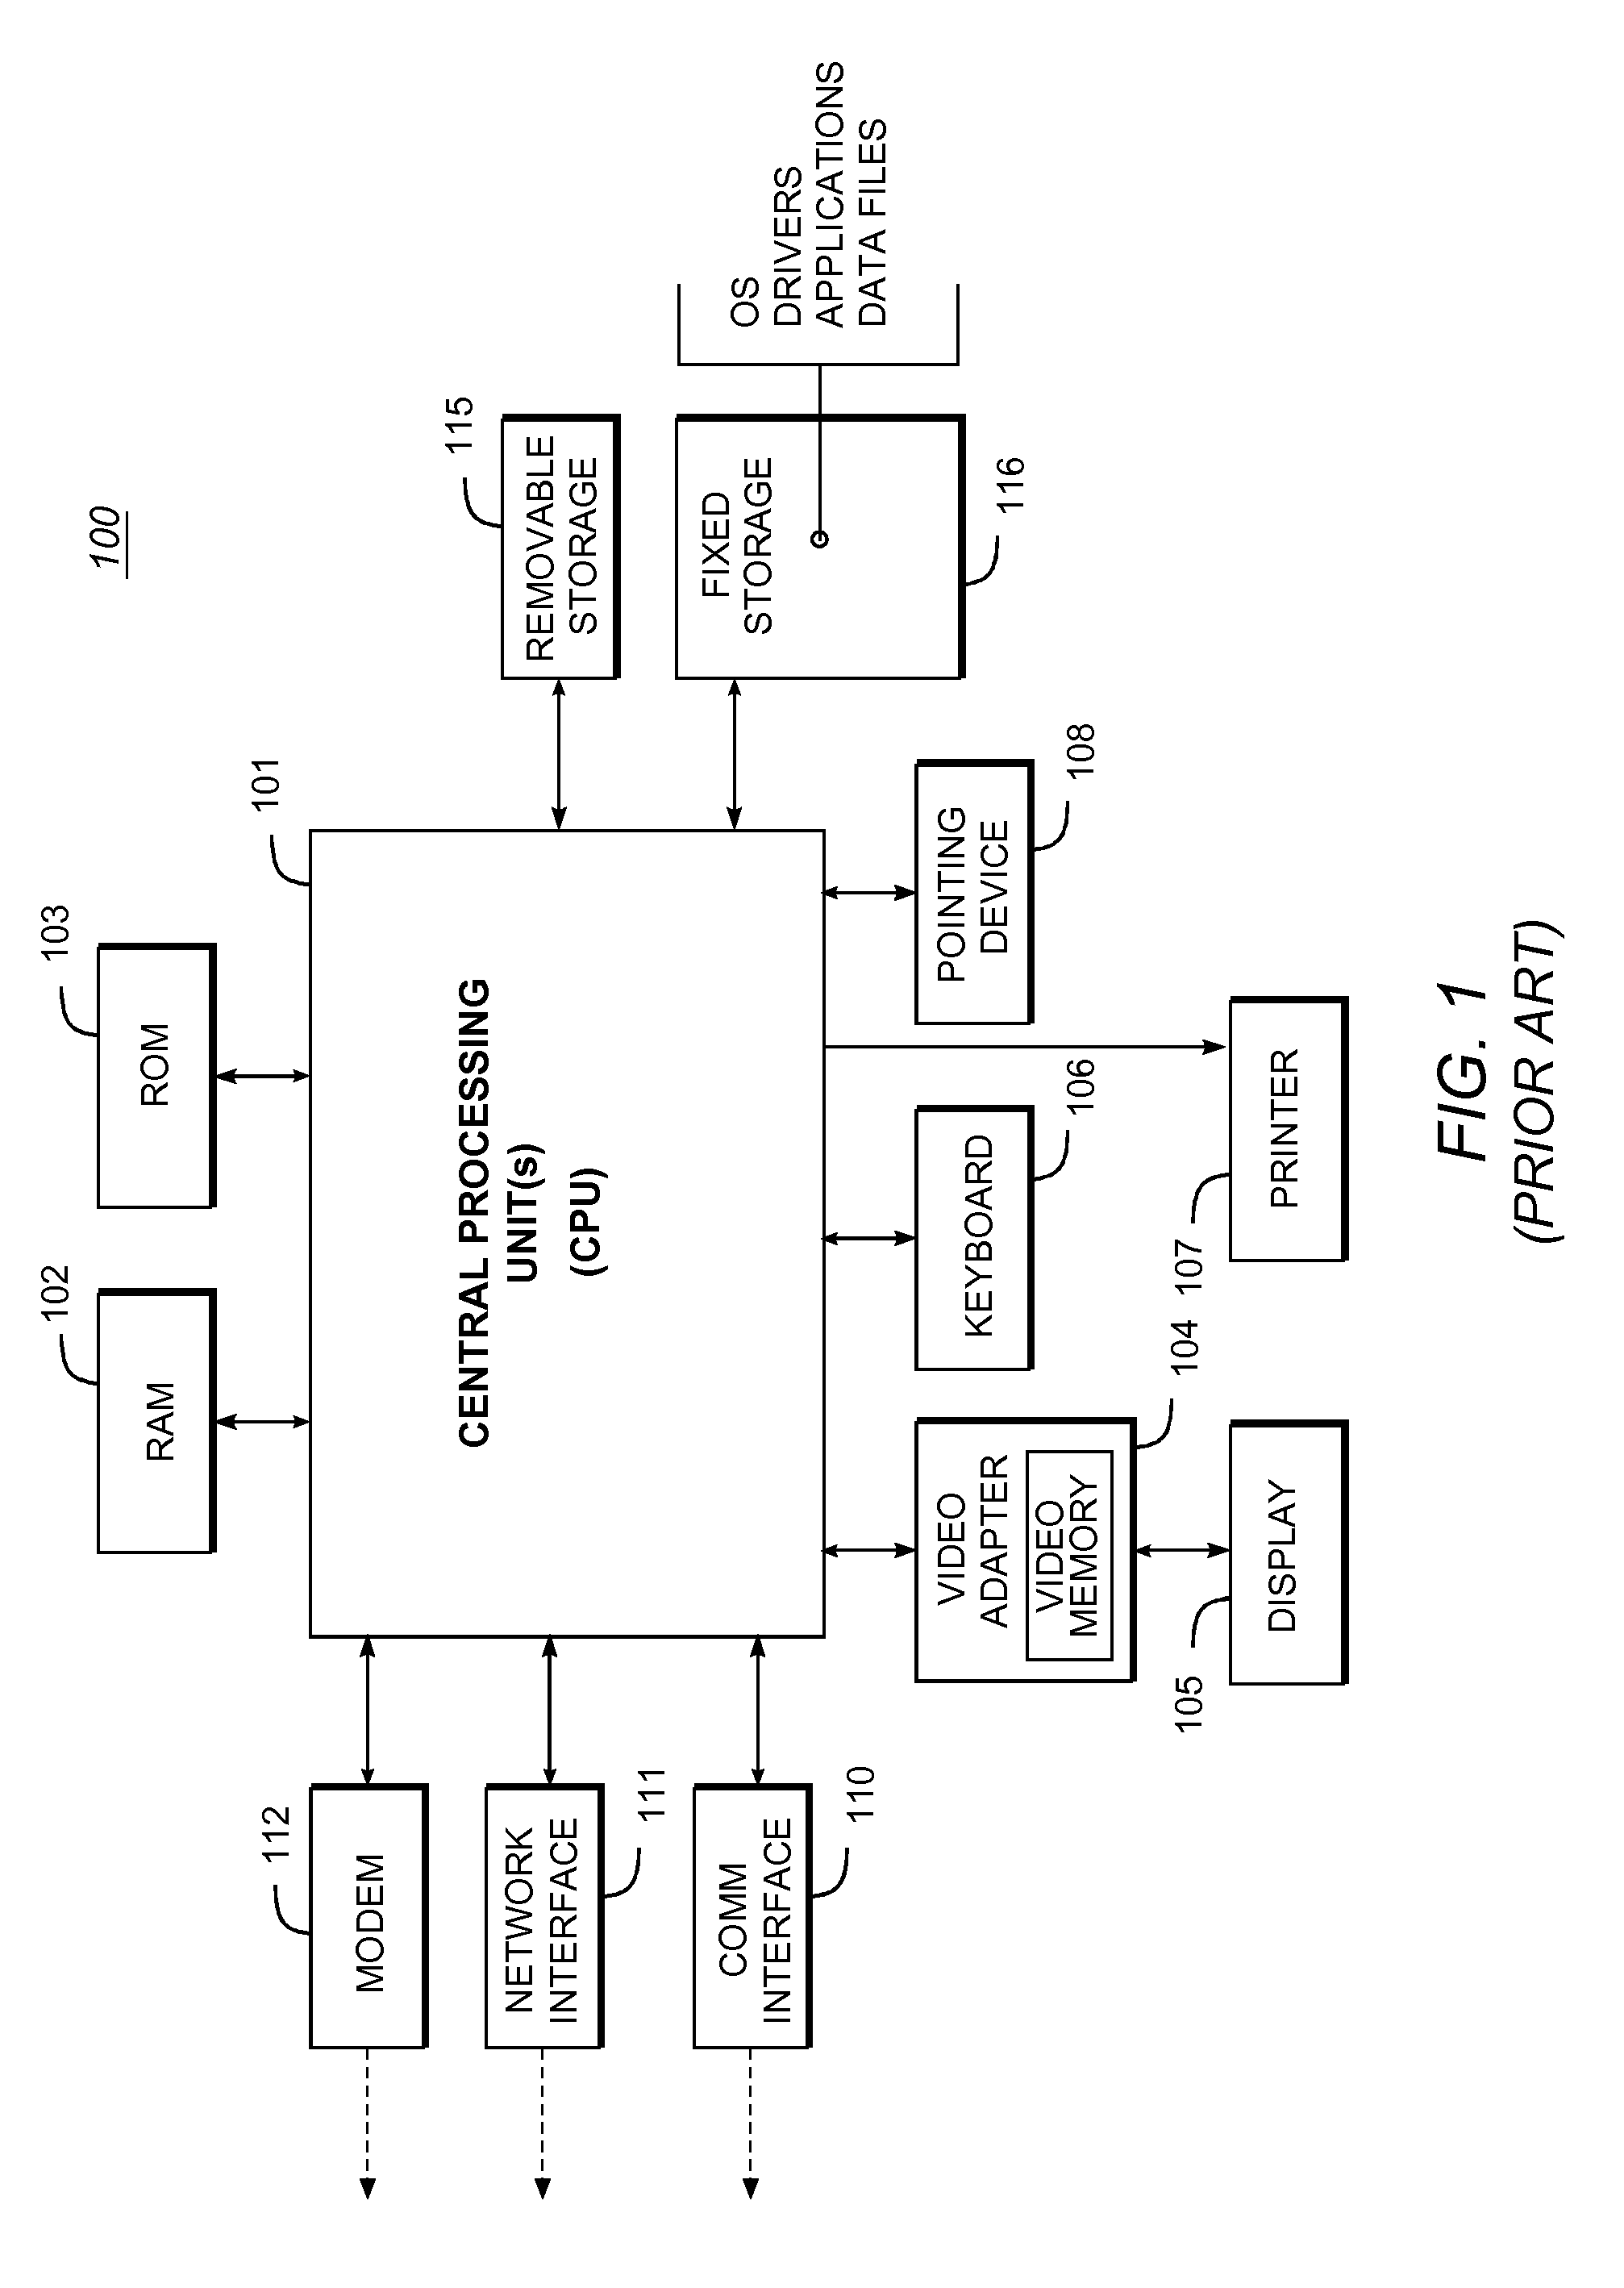 Database System Providing Encrypted Column Support for Applications